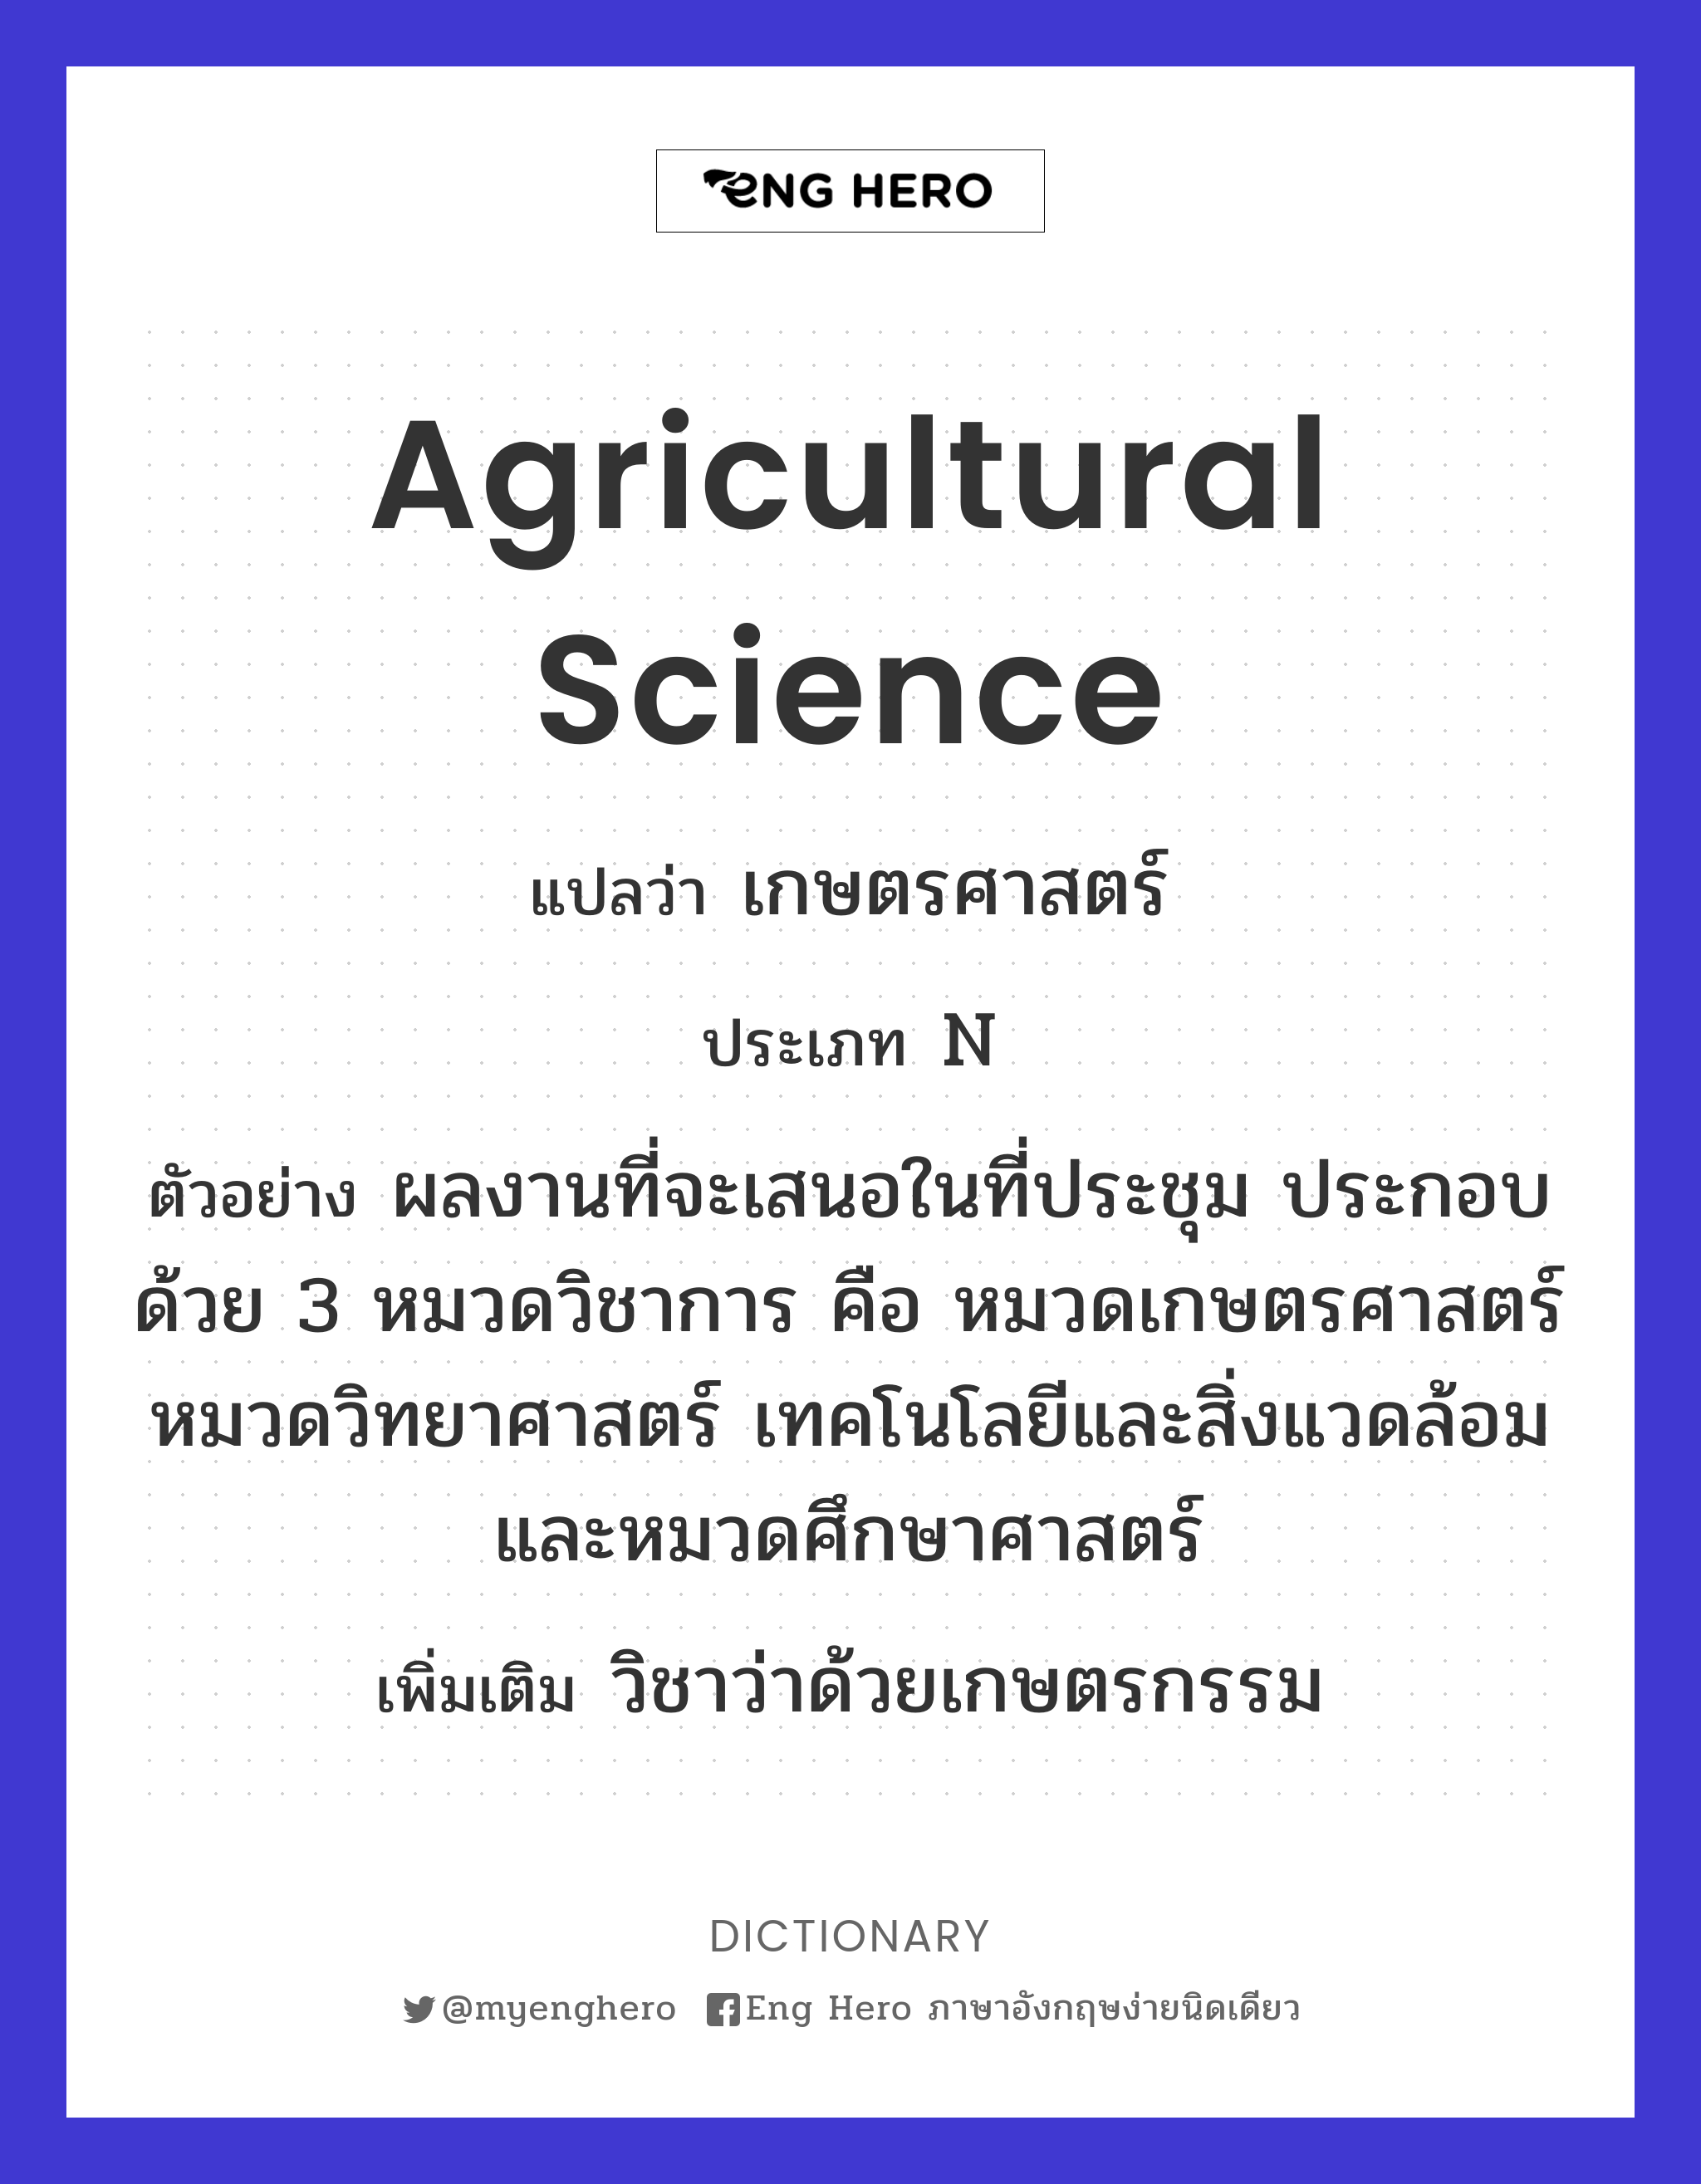 agricultural science